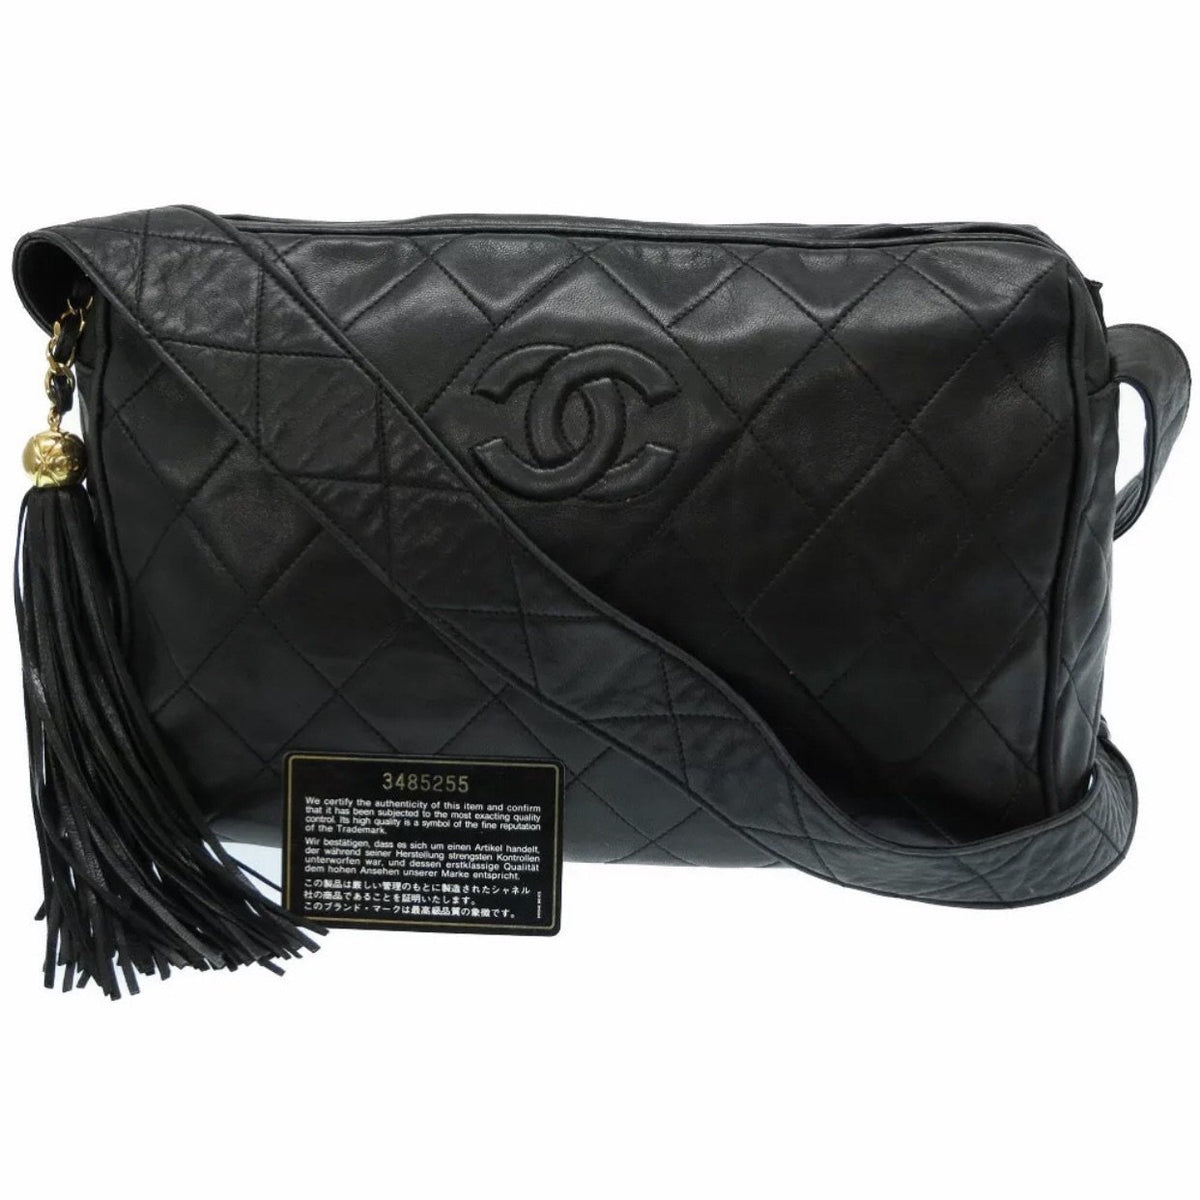 Chanel Black & Gold Chevron Quilted Lambskin Camera Bag